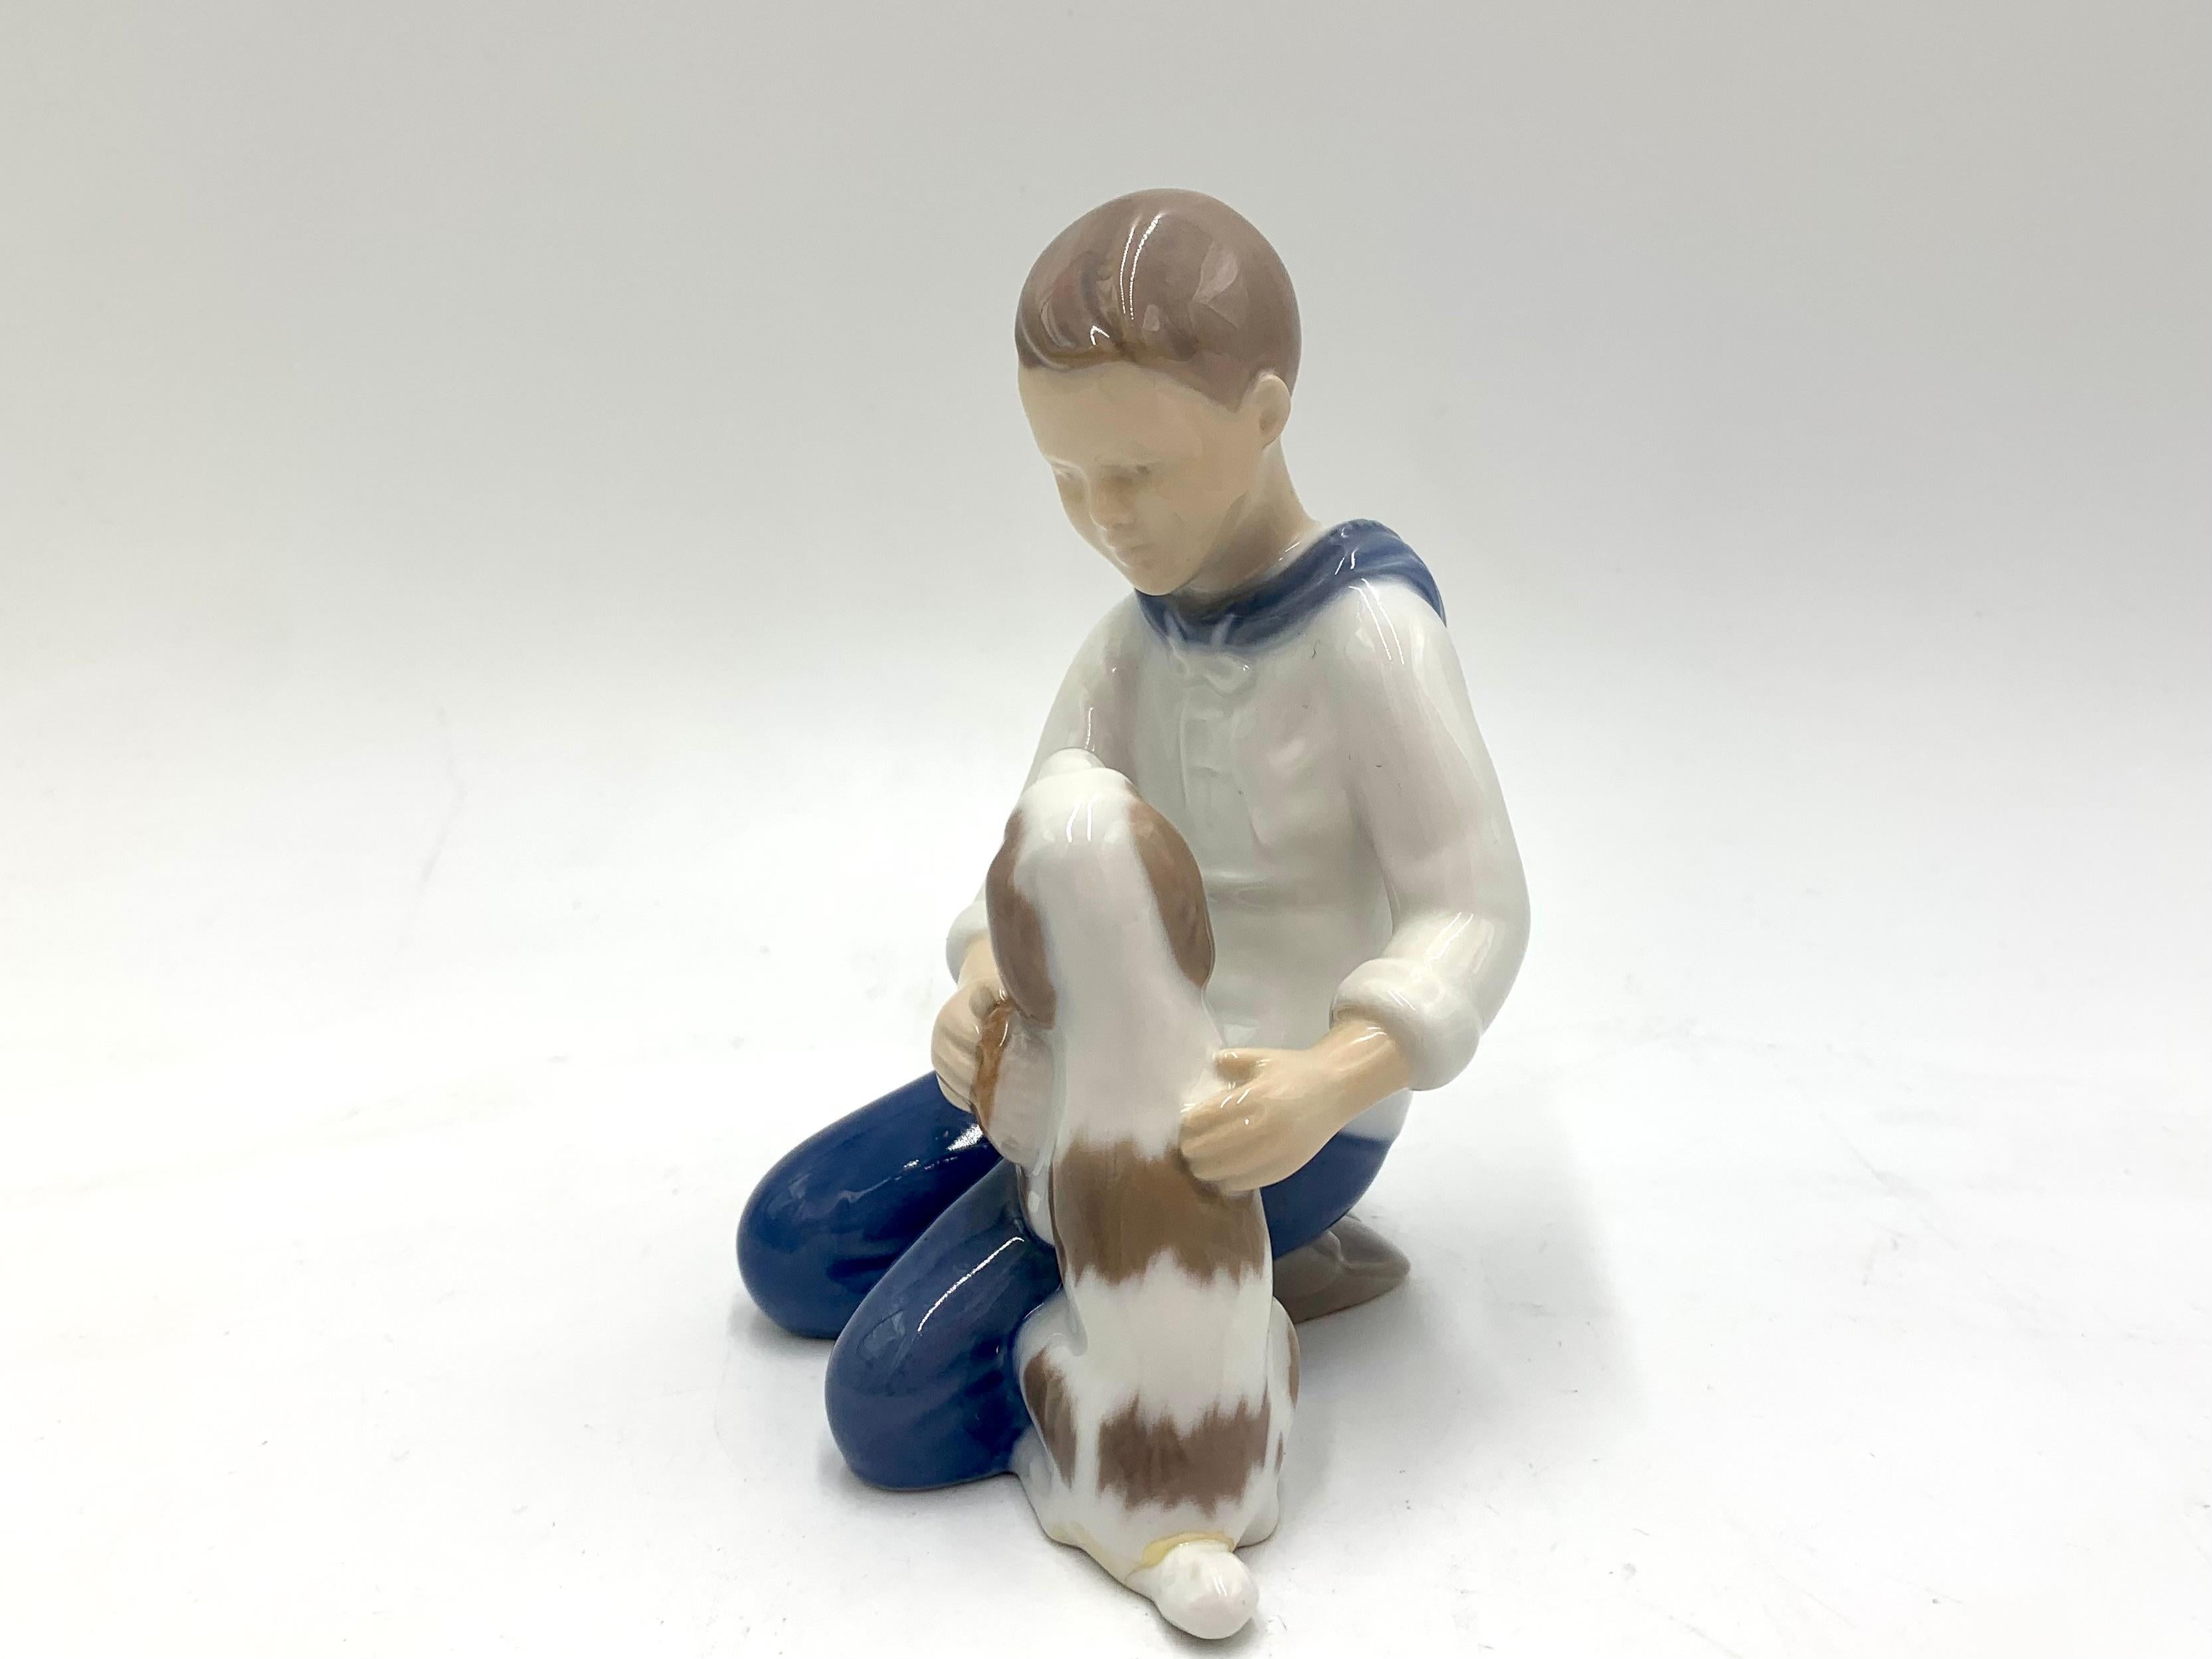 Porcelain figurine of a boy brushing a dog

Made in Denmark by Bing & Grondahl

Manufactured in 1952-1958.

Model number # 2334

Very good condition, the dog had a glued tail.

Measures: height 13cm width 9cm depth 8cm.